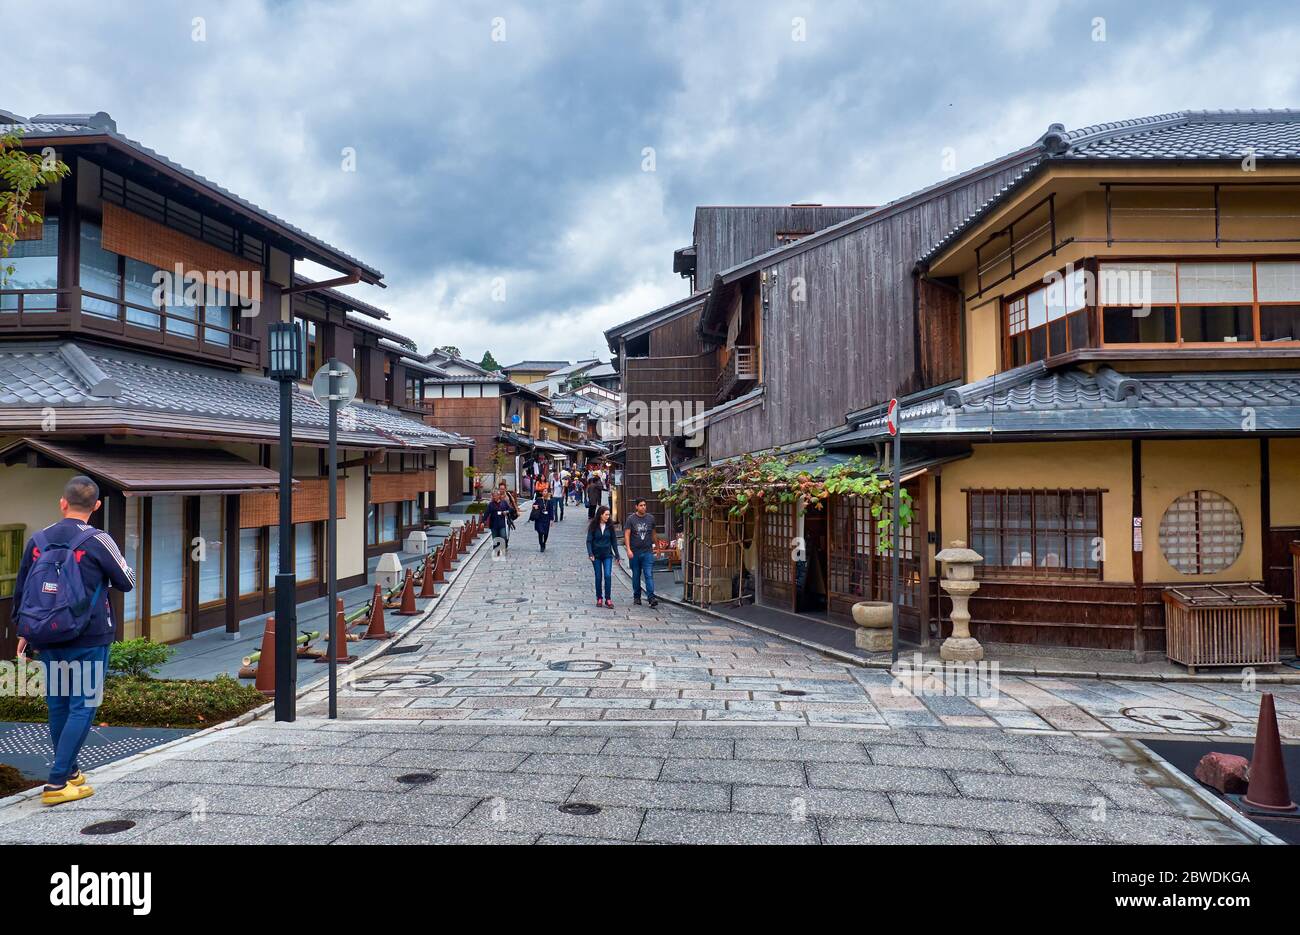 KYOTO, JAPAN - OCTOBER 18, 2019: The crowded with people Sanneizaka street surrounded by the typical Kyoto townhouses (machiya) buildings near Kiyomiz Stock Photo